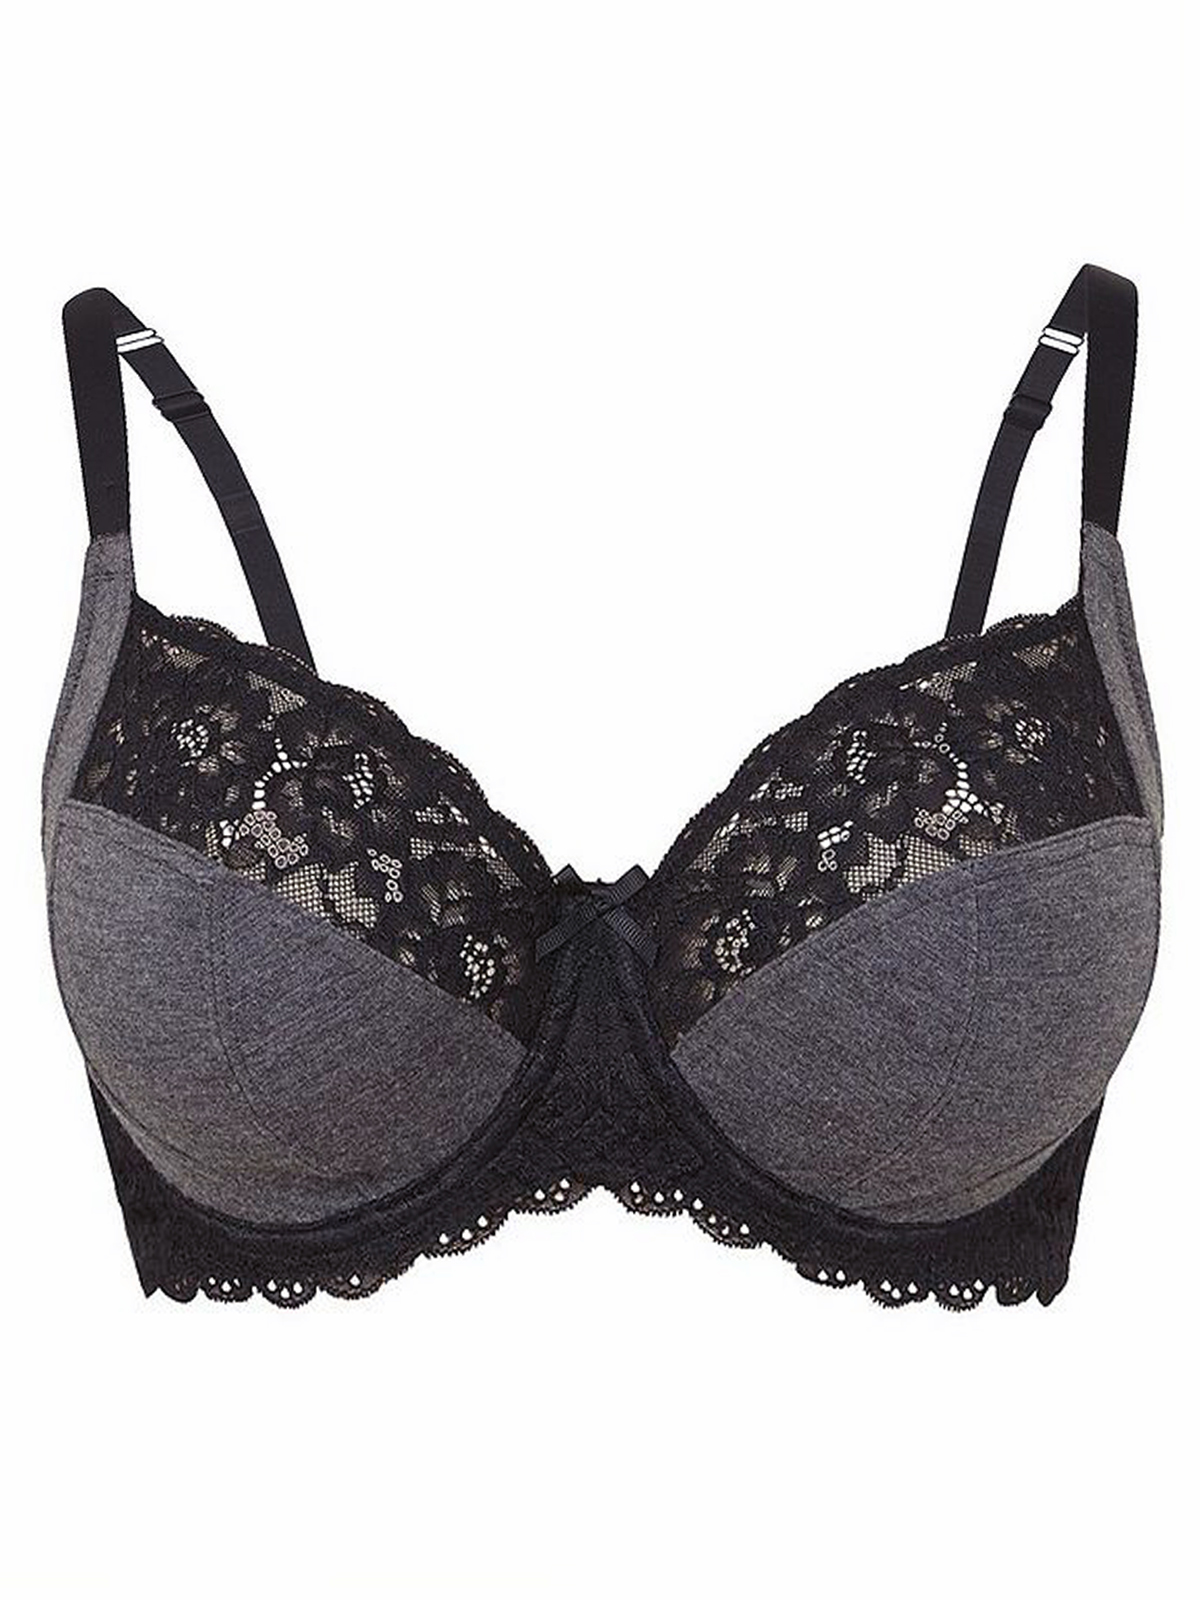 F&F - - F&F GREY Modal Blend Contrast Lace Wired Full Cup Bra - Size 32 ...